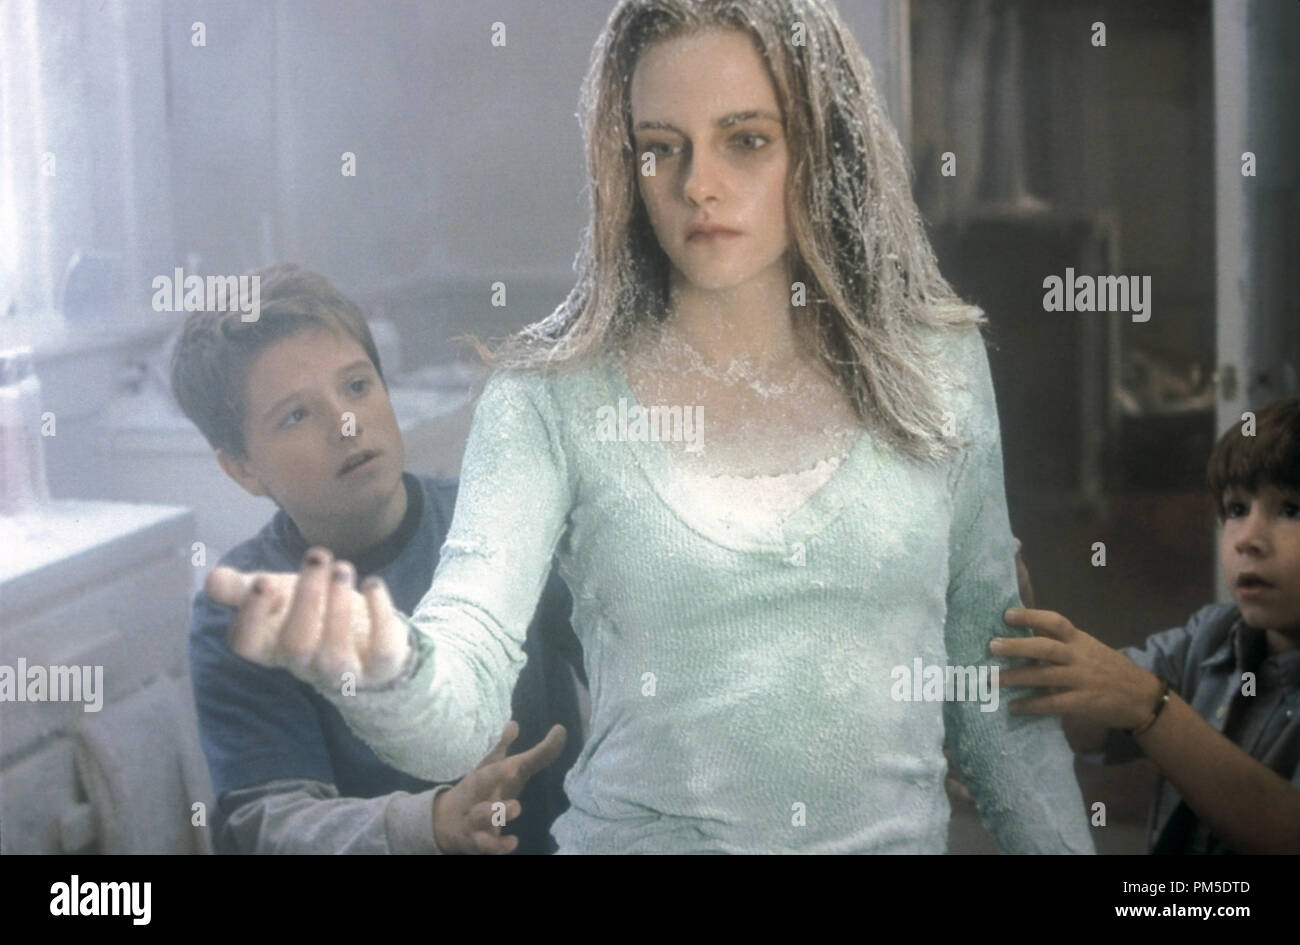 Film Still / Publicity Still from 'Zathura' Josh Hutcherson, Kristen Stewart, Jonah Bobo © 2005 Columbia Pictures Photo Credit: Merrick Morton  File Reference # 30736562THA  For Editorial Use Only -  All Rights Reserved Stock Photo